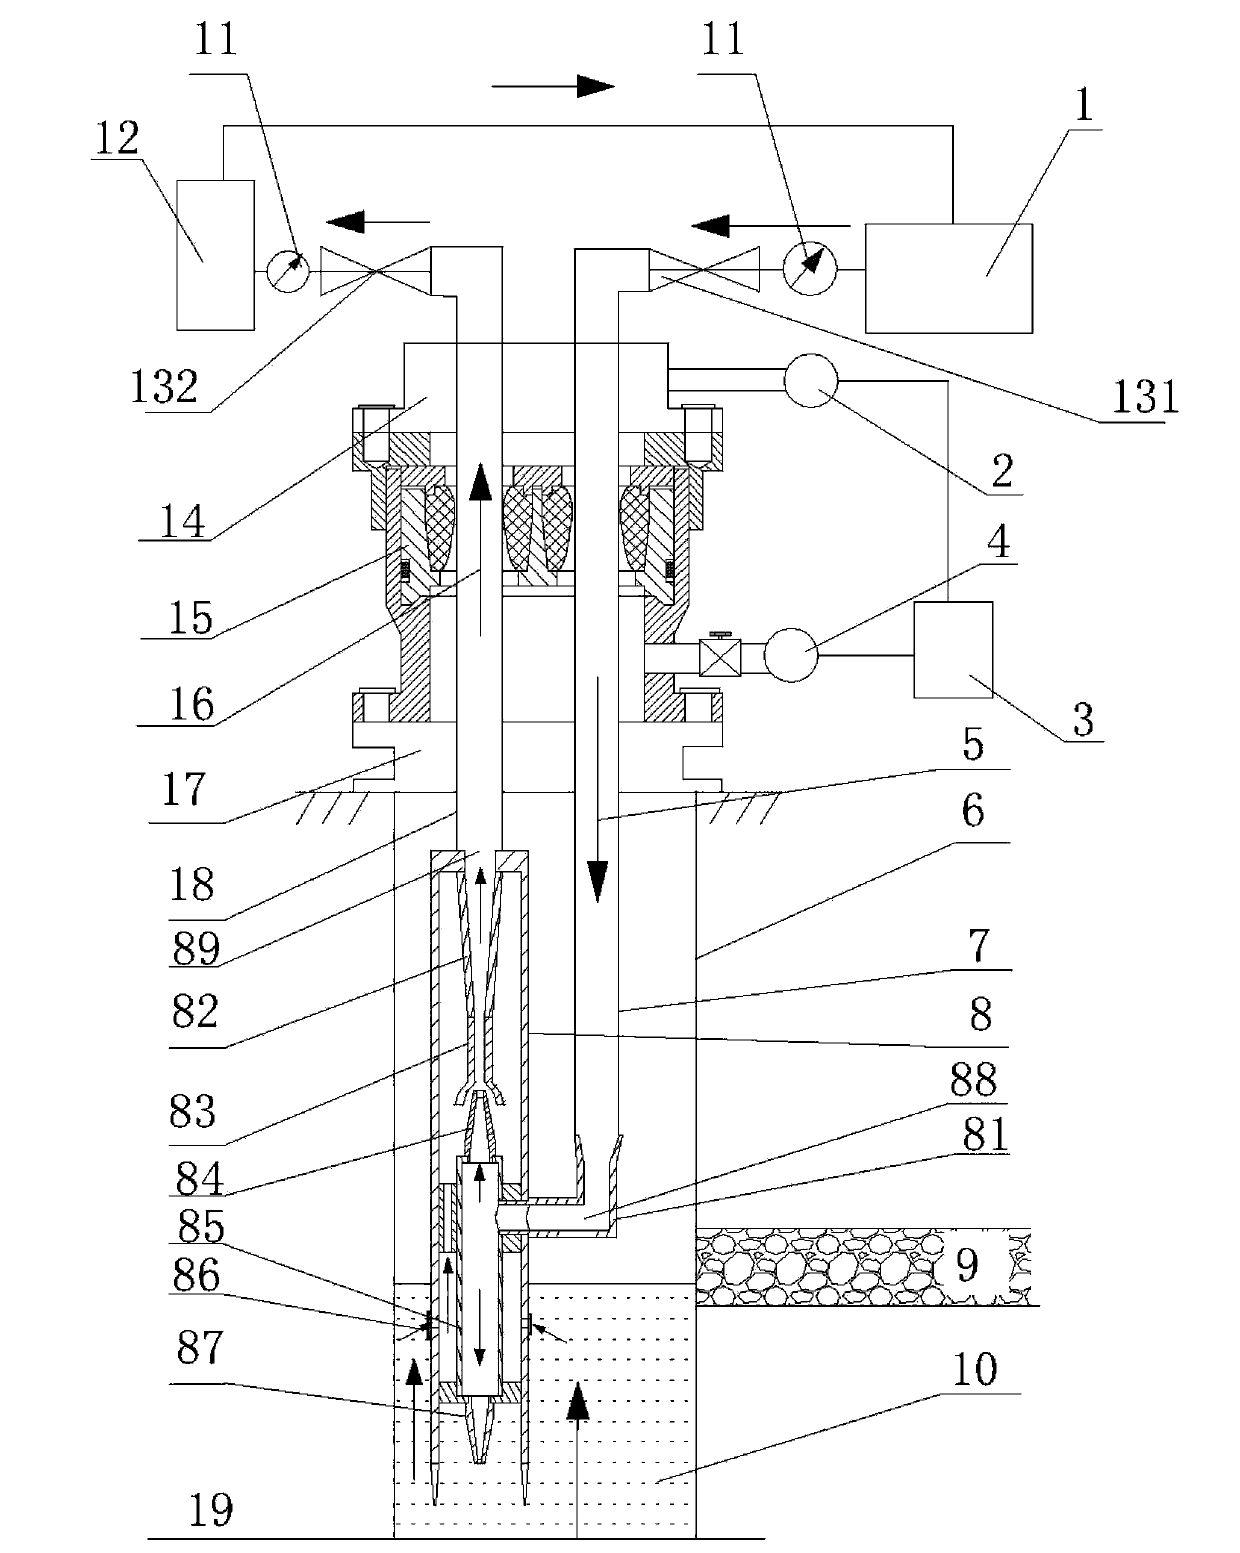 Parallel-tube snubbing pulverized coal discharging system for coal-bed gas well